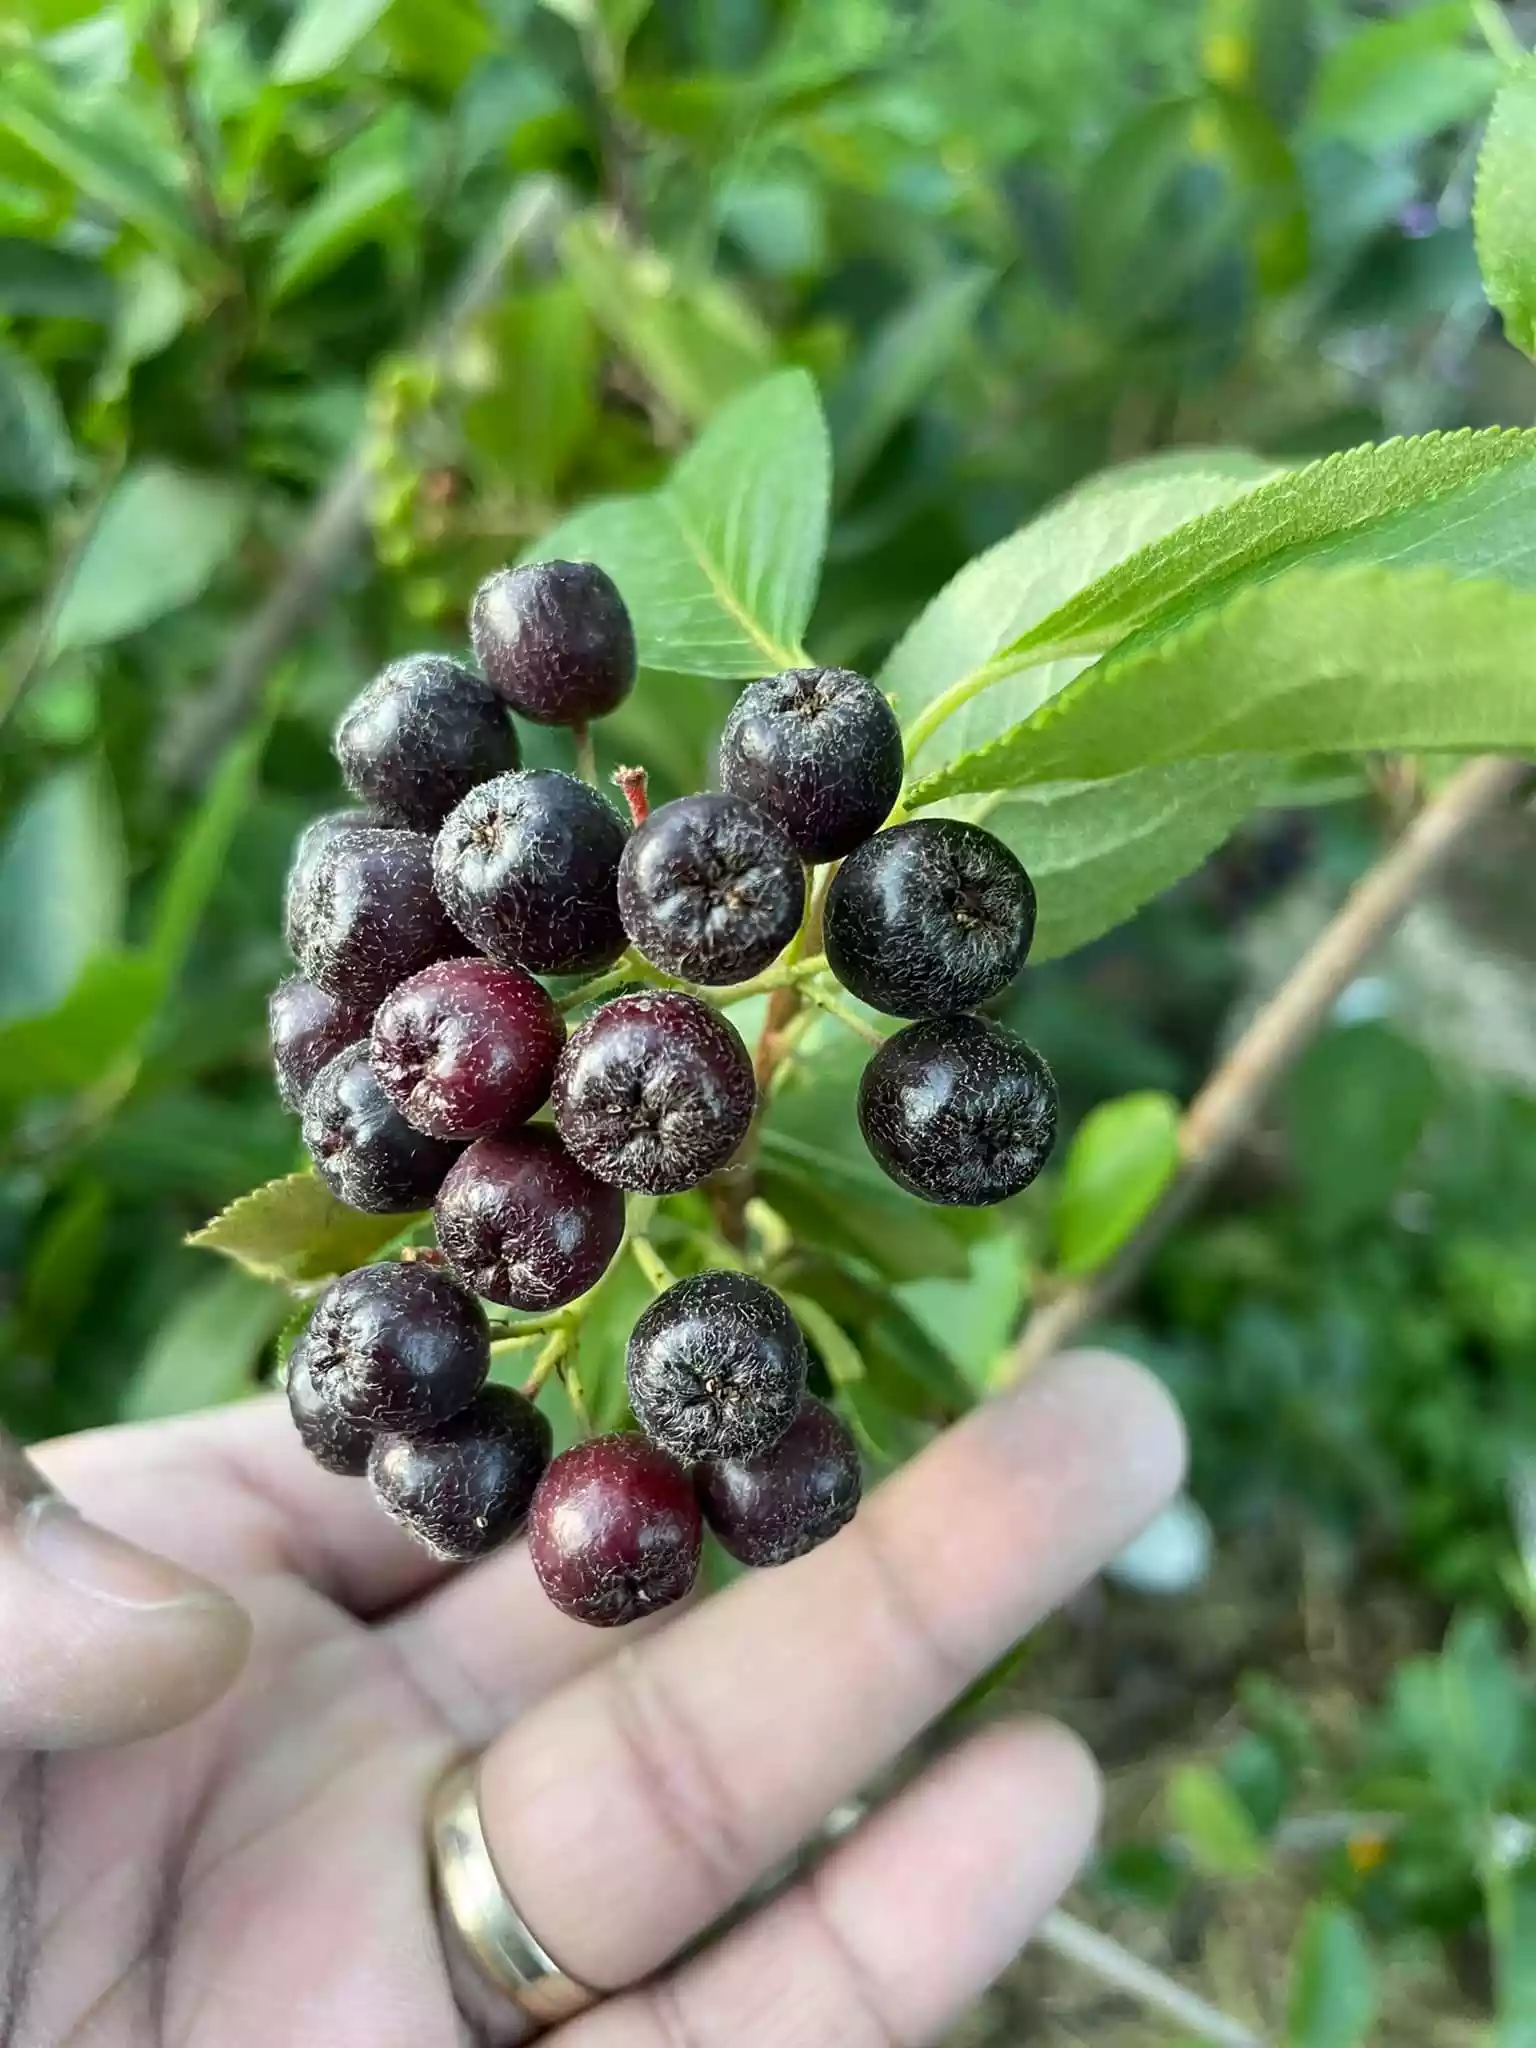 fromthegarden Aronia melanocarpa
Rich in fiber, vitamin C, and powerful antioxidants that may have heart-healthy, immune-boosting, and anticancer properties. You can add fresh aronia berries to many recipes, try them in juices, jams, and syrups, or use them as a supplement.